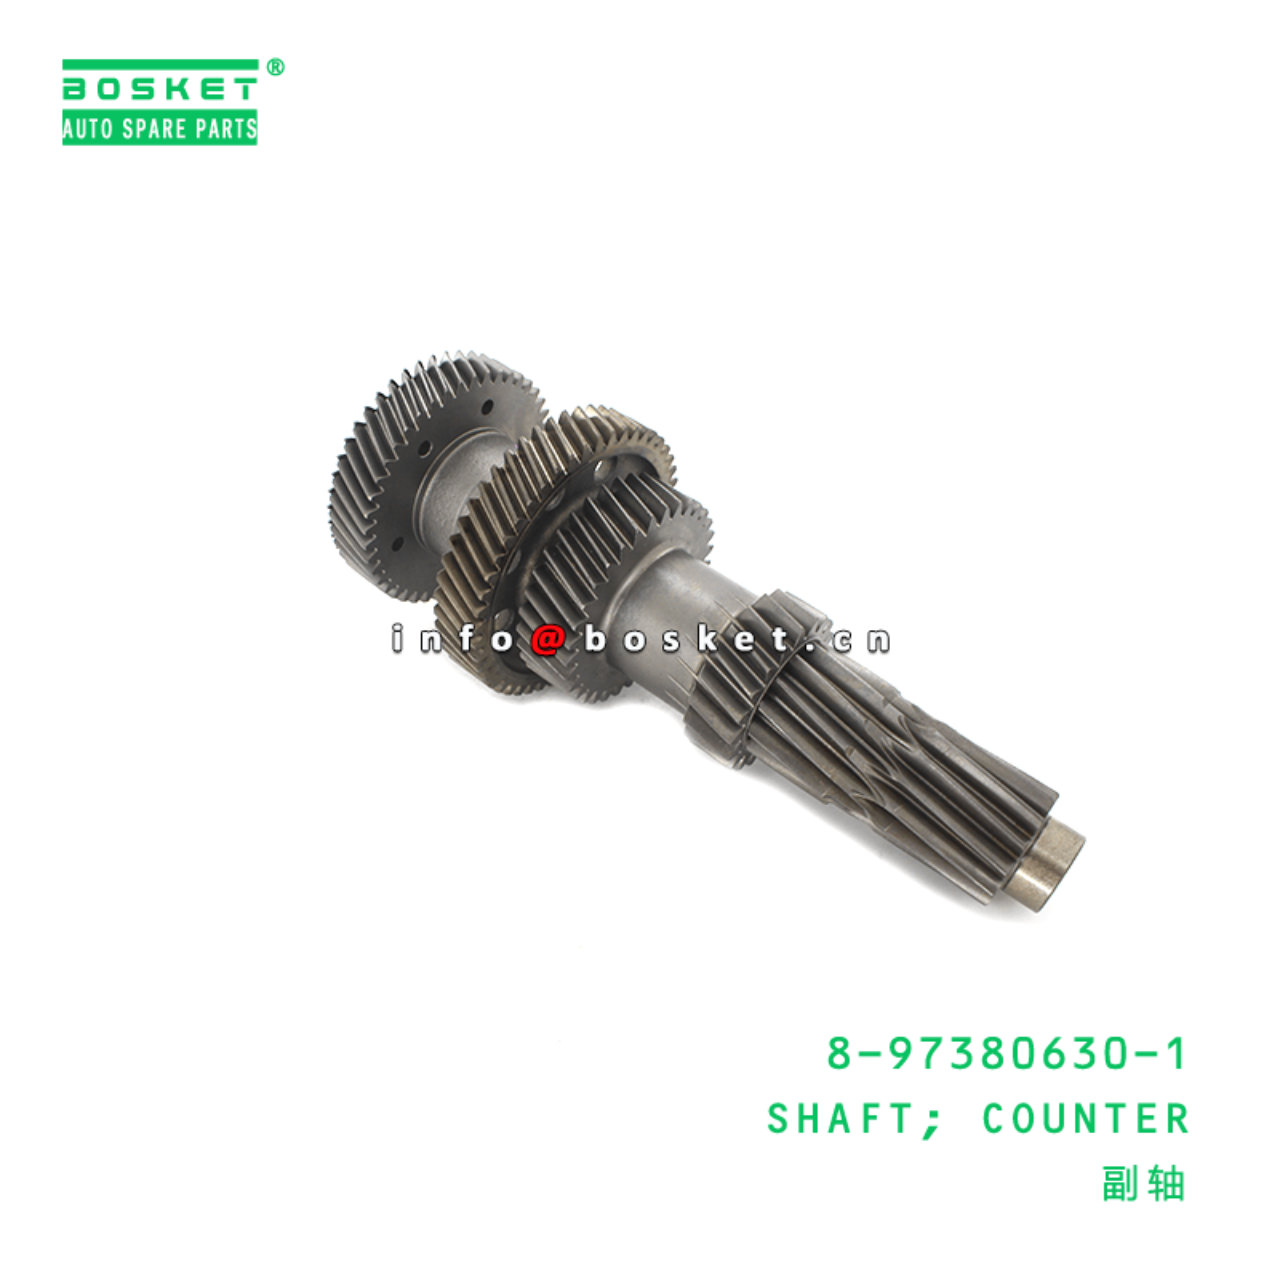 8-97380630-1 Counter Shaft 8973806301 Suitable for ISUZU NKR77 4JH1